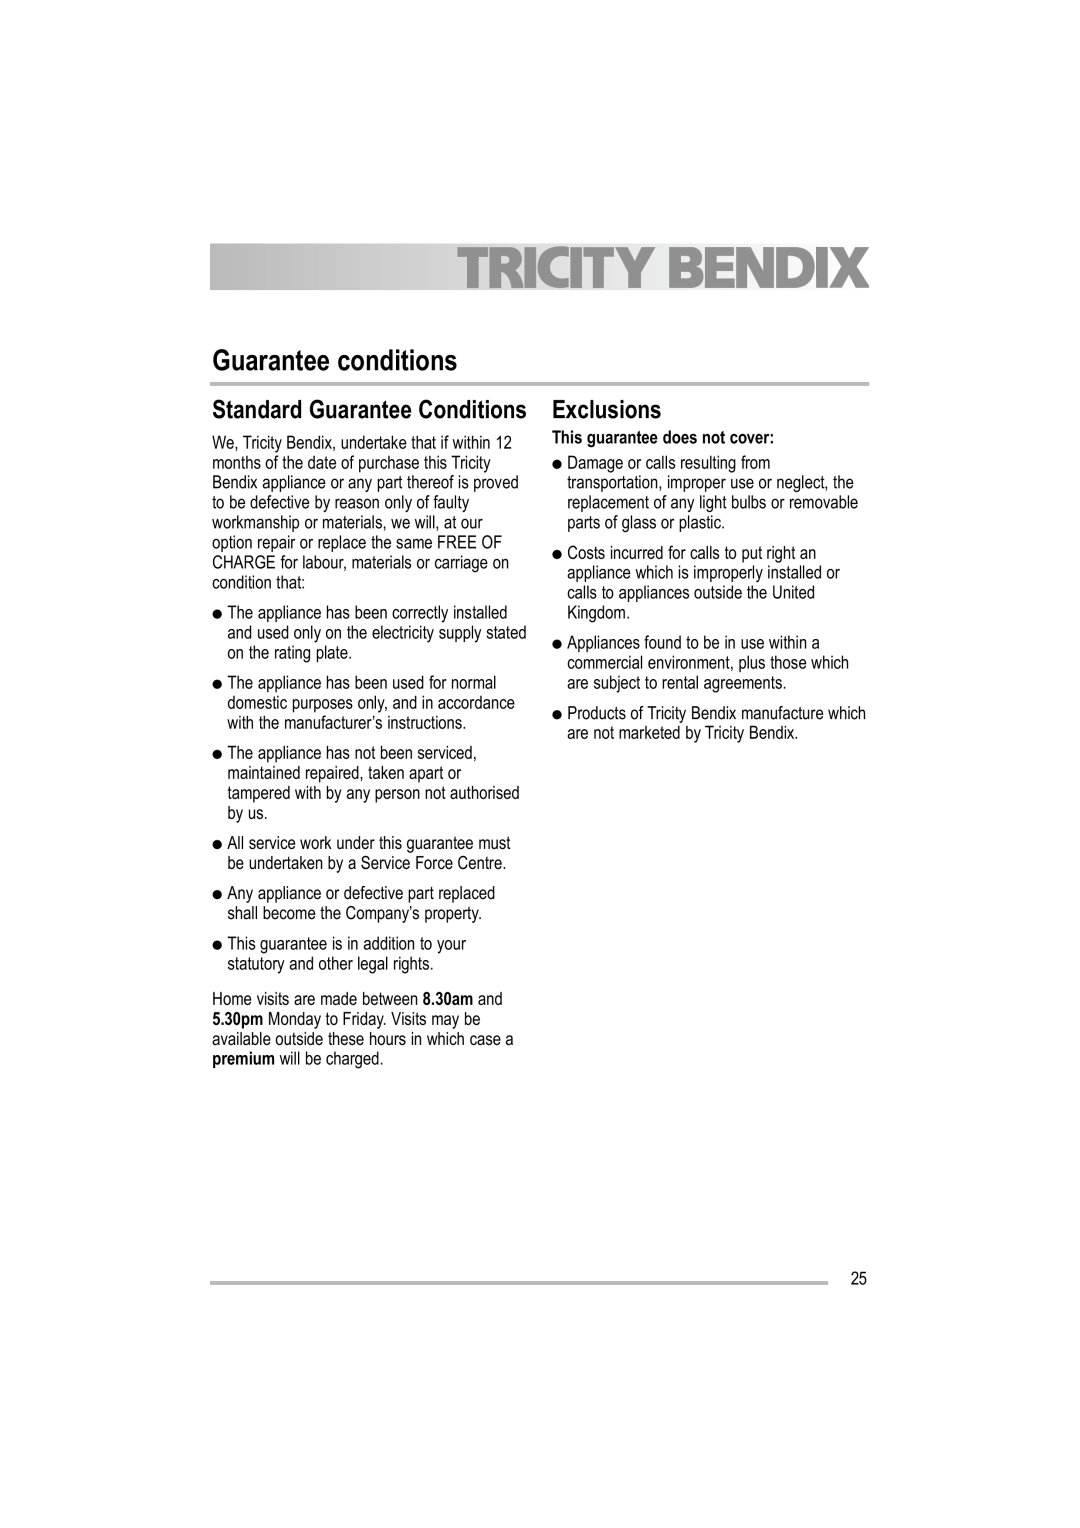 Tricity Bendix TDF 221 Guarantee conditions, Exclusions, This guarantee does not cover, Standard Guarantee Conditions 